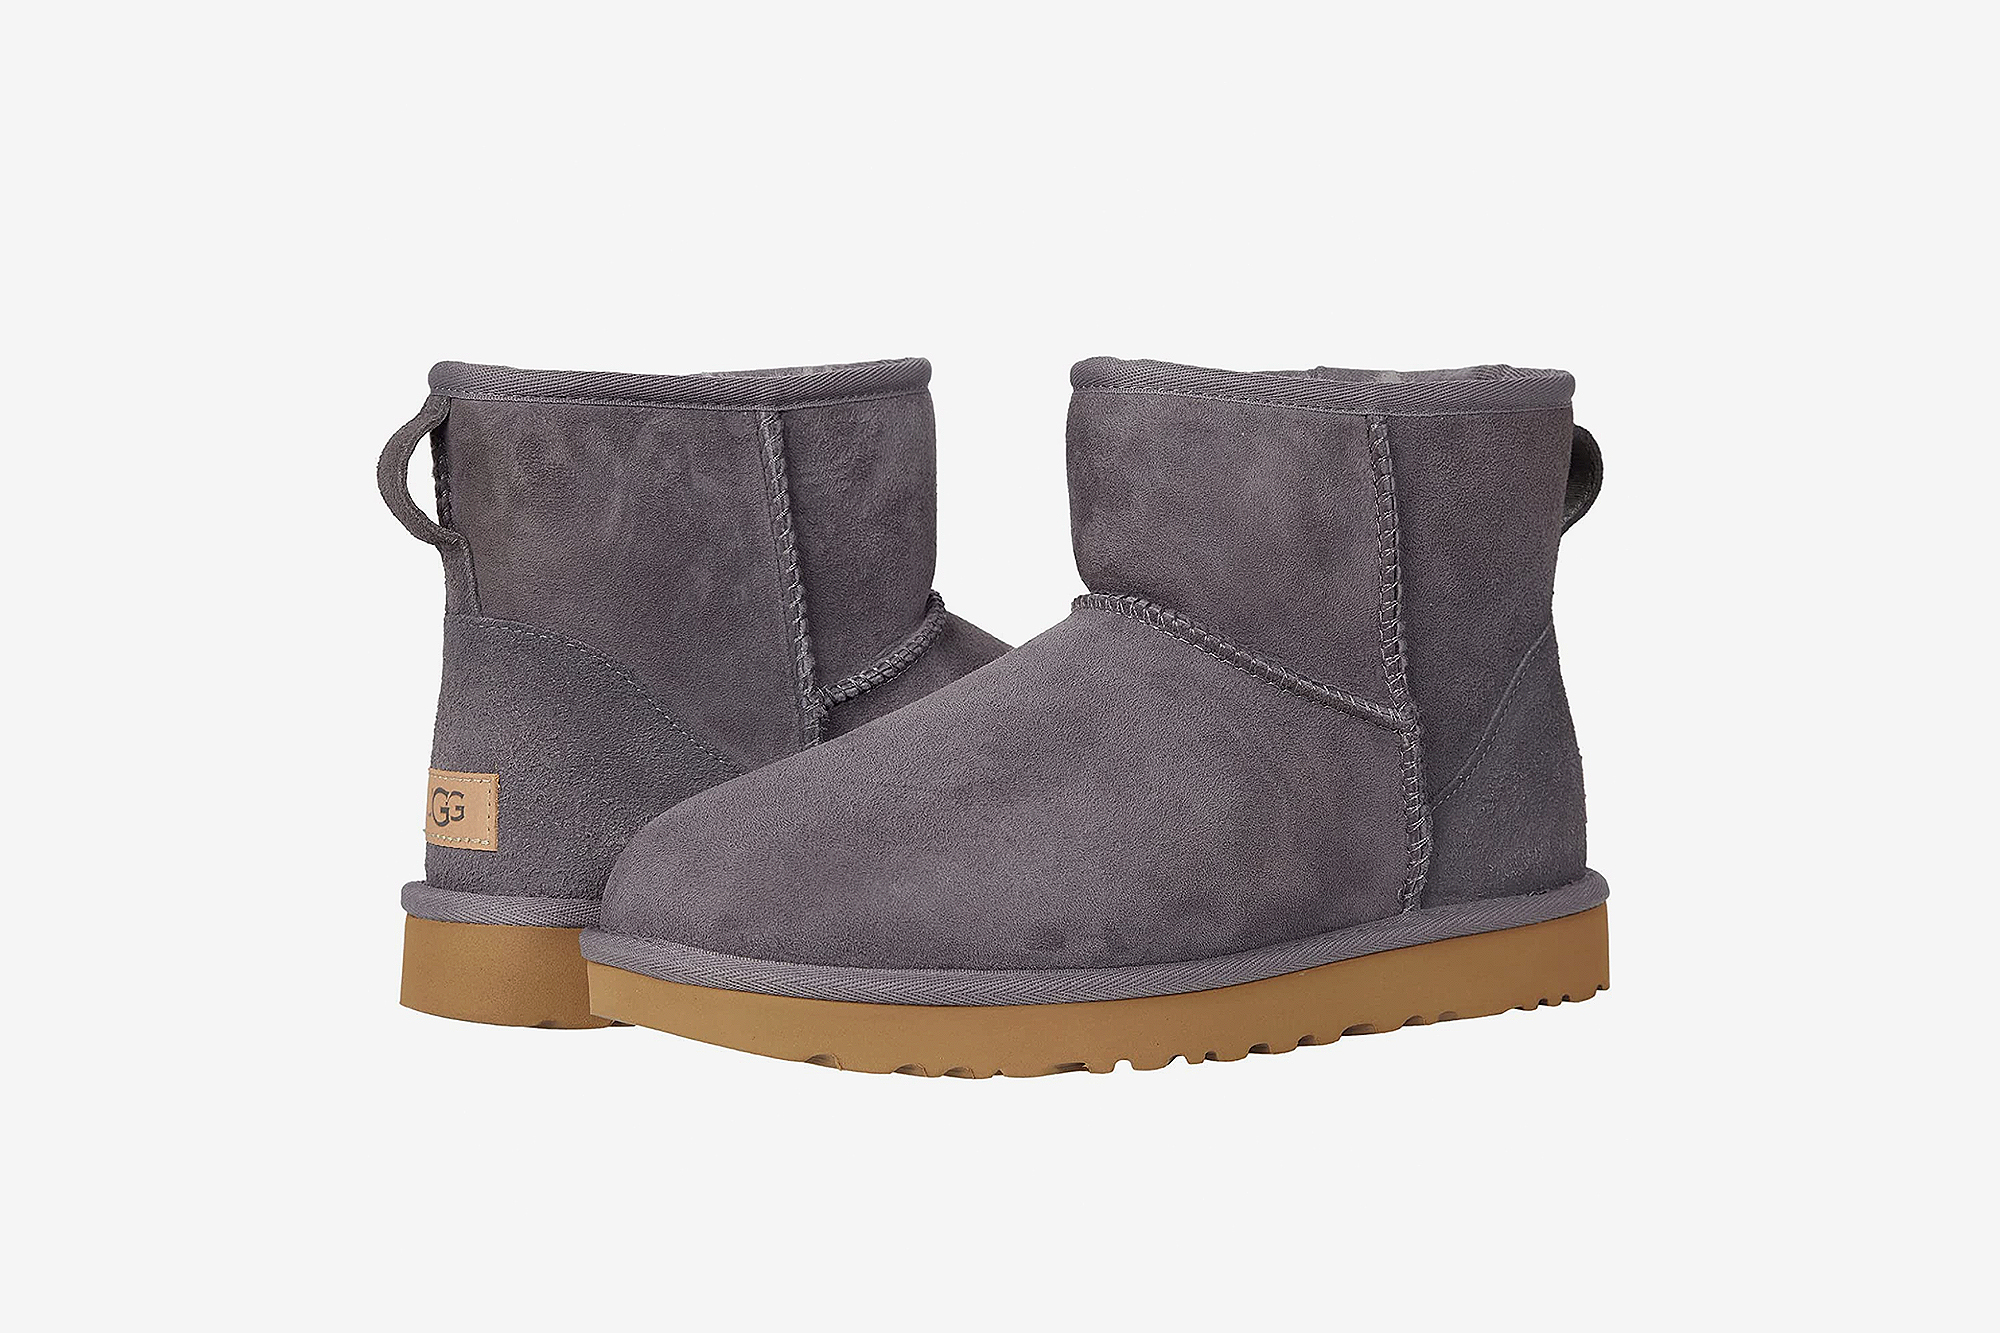 The UGG Boots That Celebs Love Are on Zappos — Shop Now